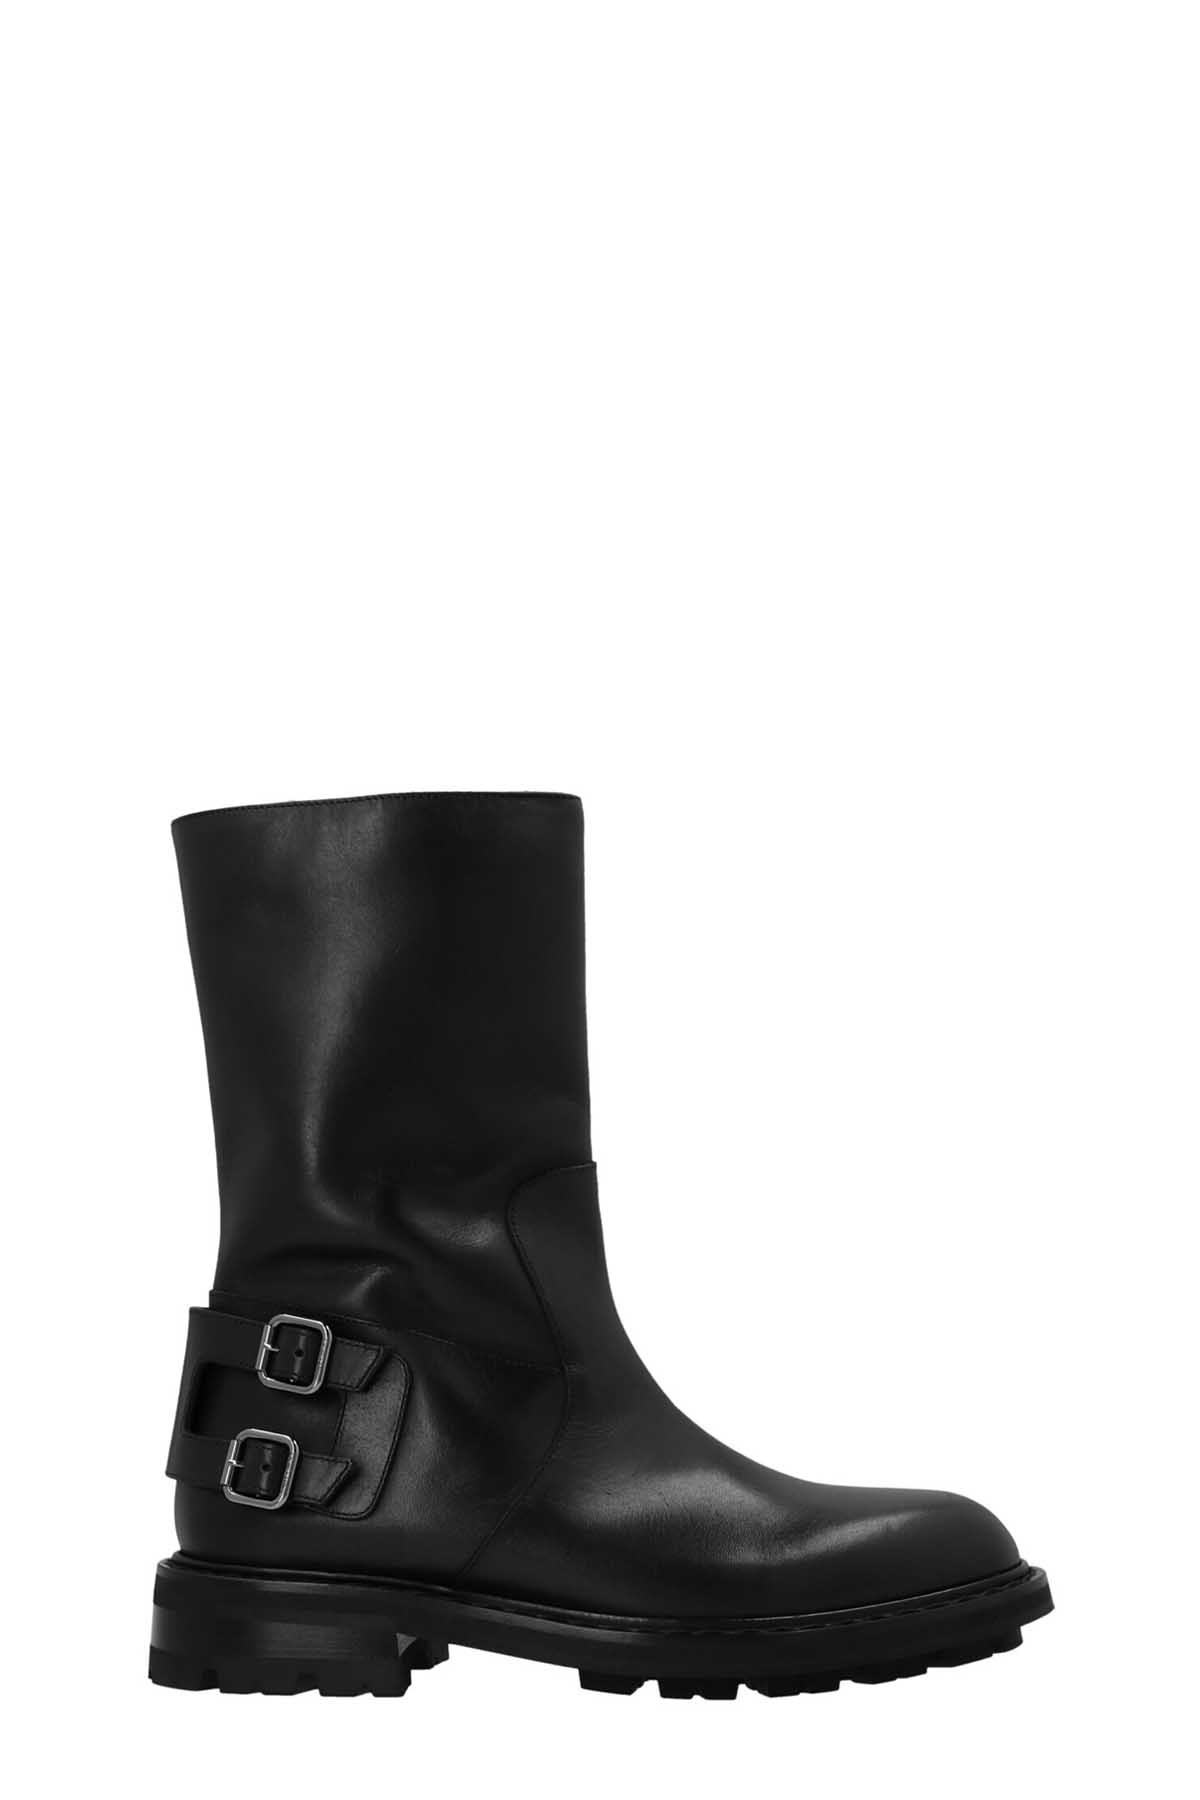 JIMMY CHOO 'Roscoe’ Ankle Boots